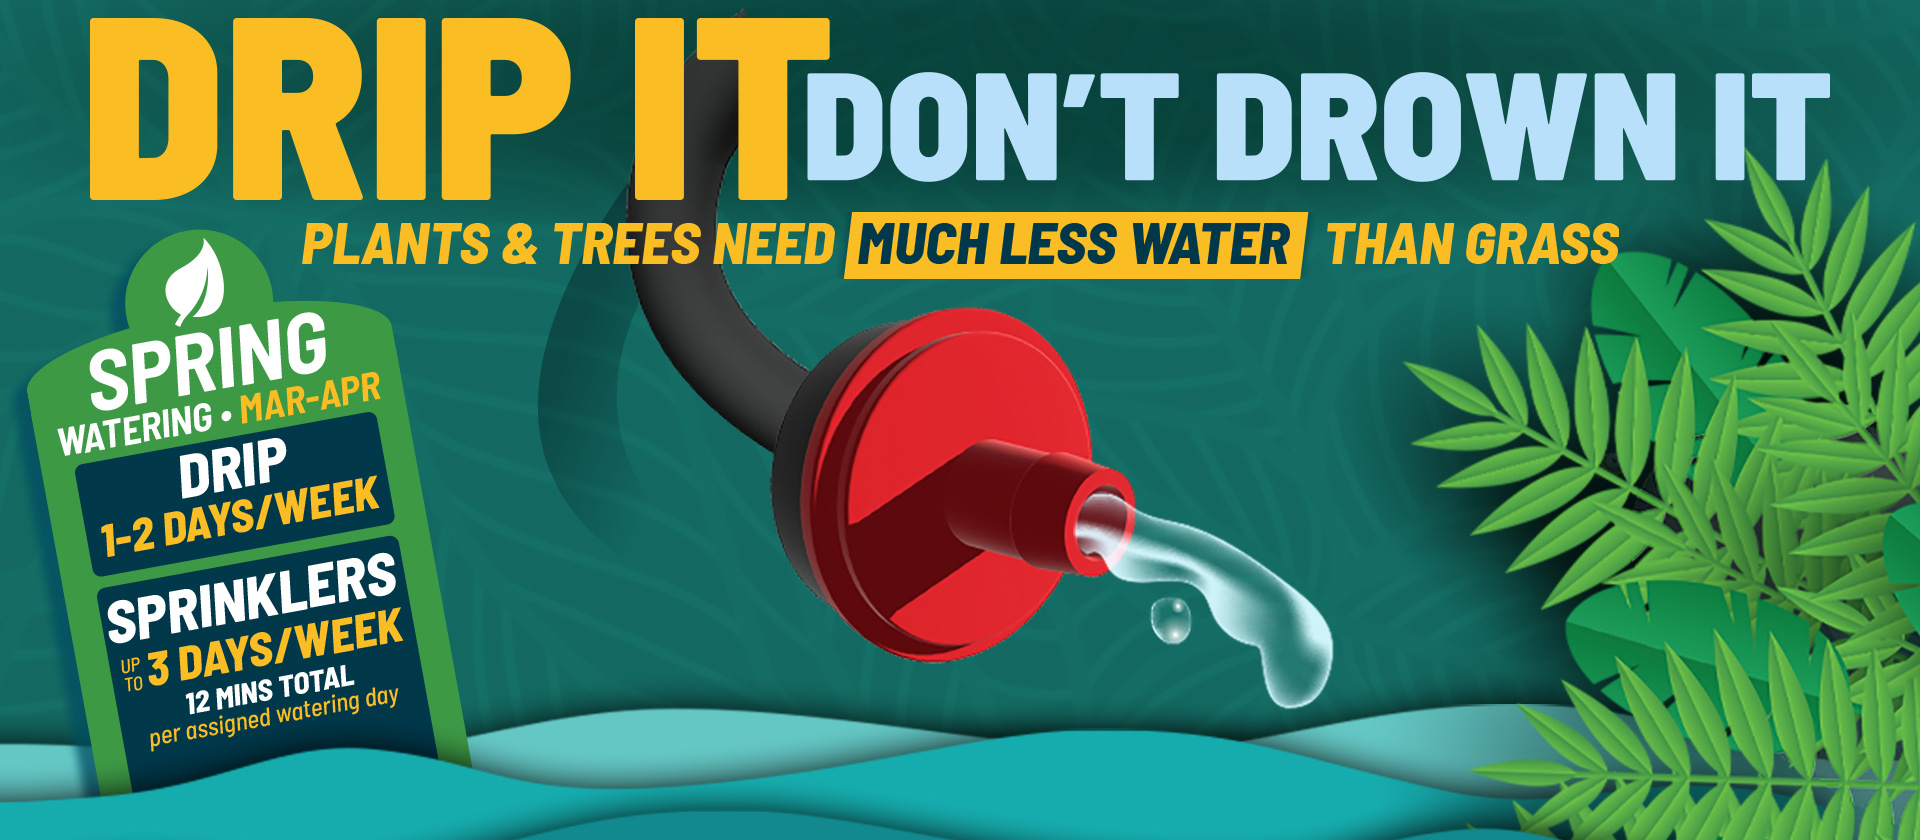 Graphic says "drip it don't drown it" - plants and trees need much less water than grass 